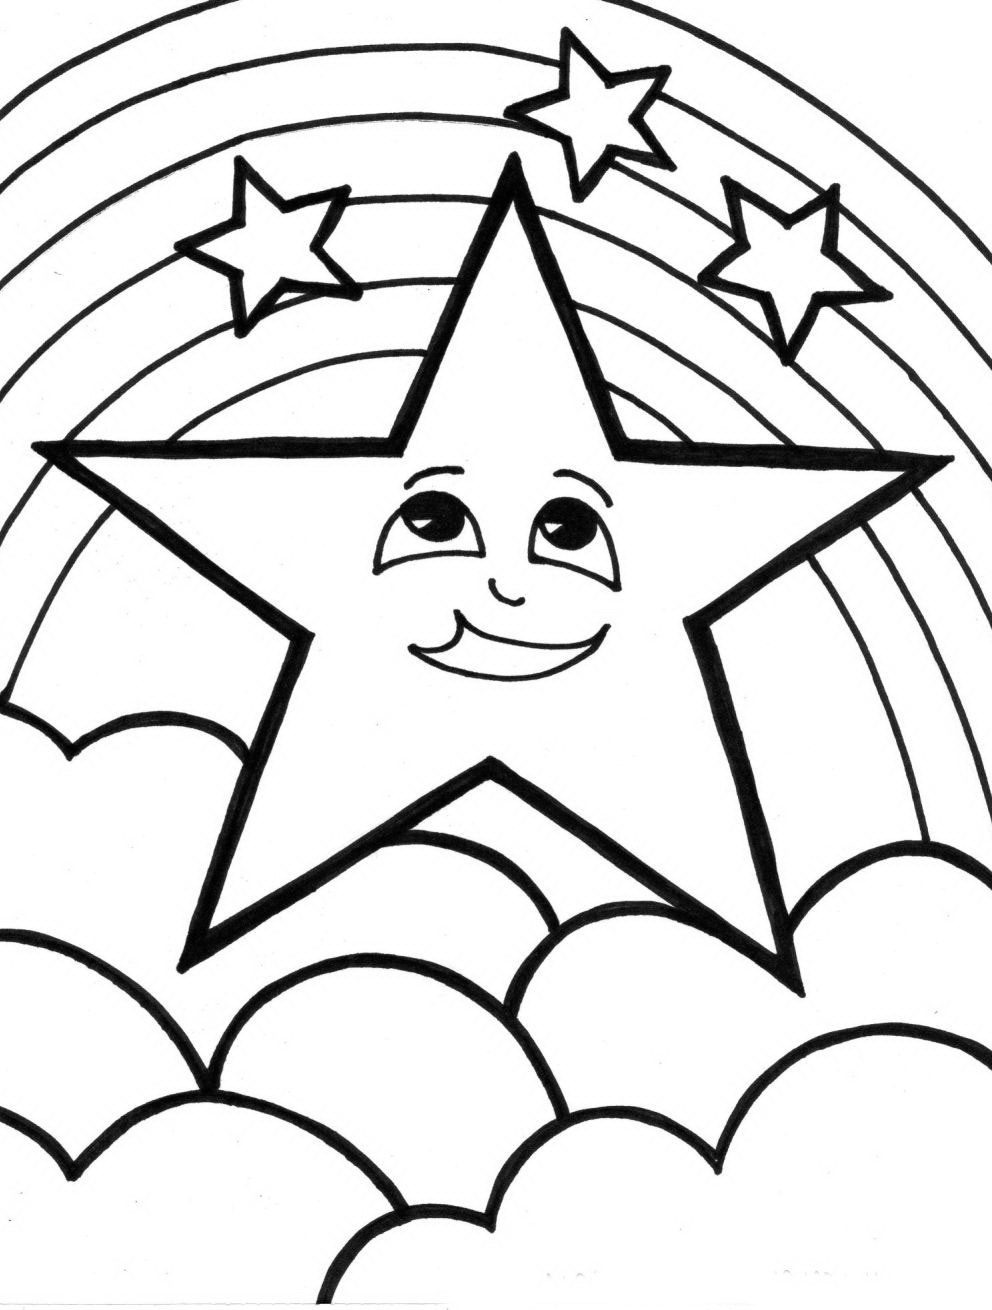 Rainbow Coloring Sheet Printable
 Rainbow Coloring Pages for childrens printable for free